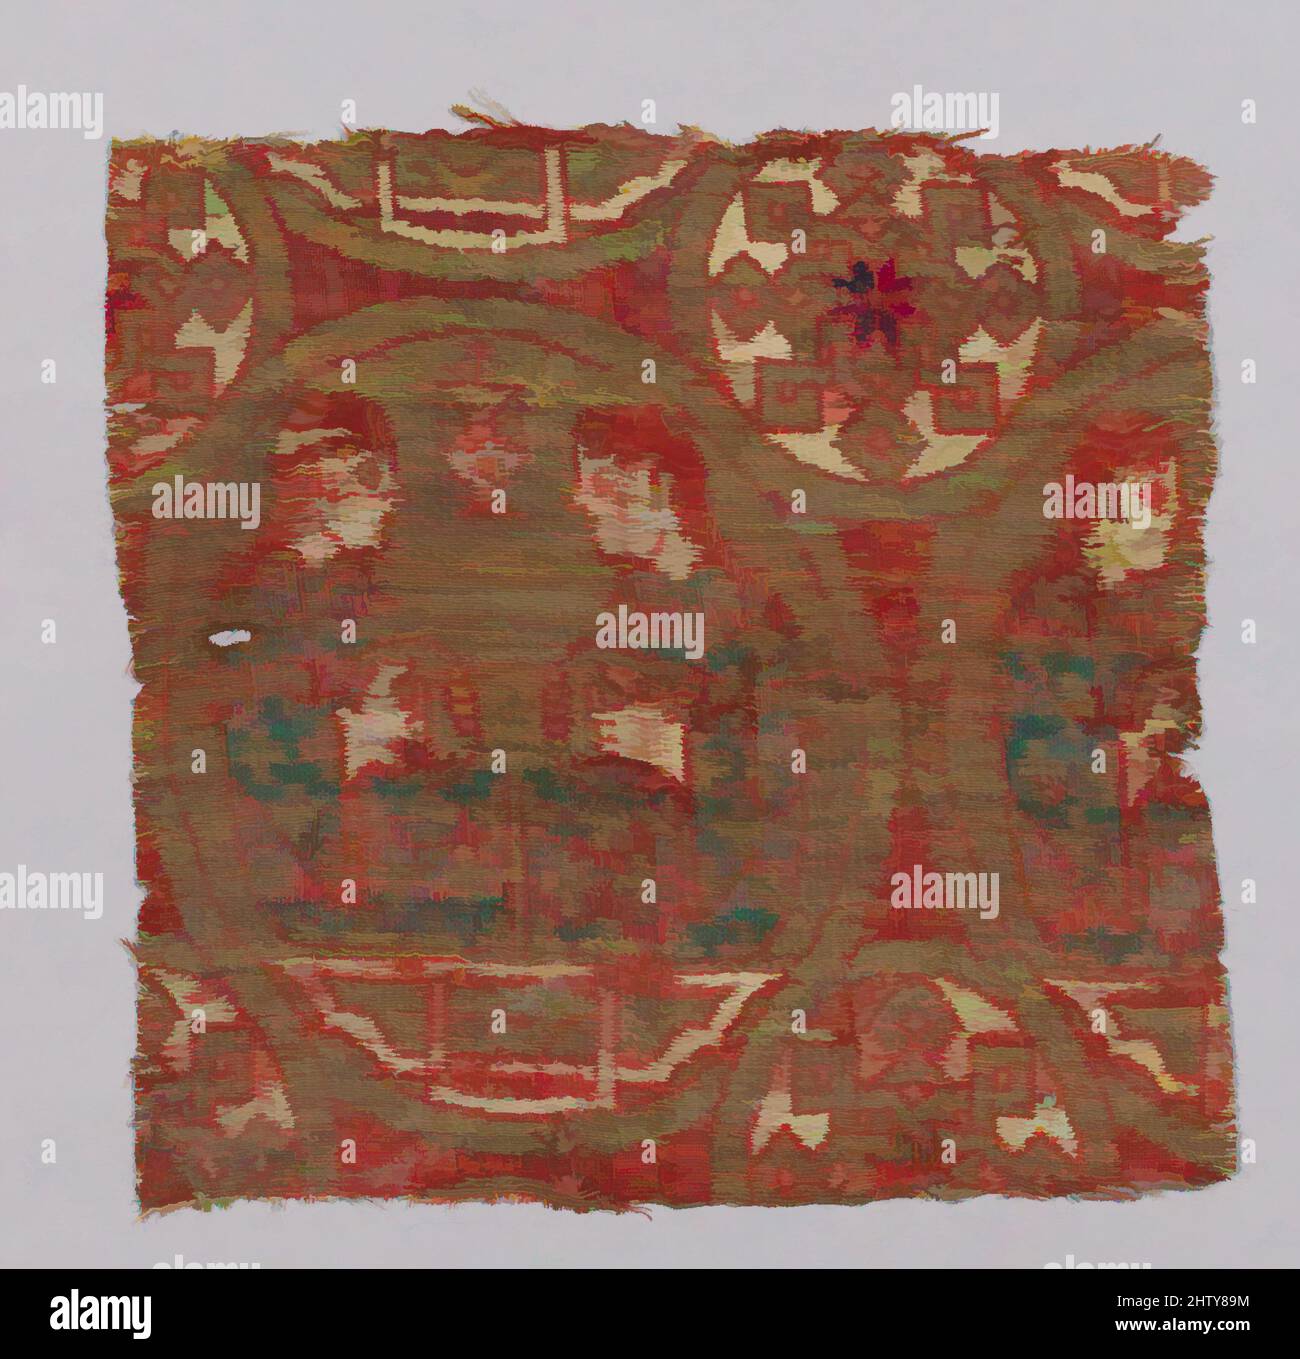 Art inspired by Textile Fragment, 13th century, Attributed to Spain, Silk, gilt animal substrate around a silk core; lampas, Textile: H. 4 1/16 in. (10.3 cm), Textiles-Woven, The main decorative elements of this silk fragment are a row of large roundels enclosing two seated female, Classic works modernized by Artotop with a splash of modernity. Shapes, color and value, eye-catching visual impact on art. Emotions through freedom of artworks in a contemporary way. A timeless message pursuing a wildly creative new direction. Artists turning to the digital medium and creating the Artotop NFT Stock Photo